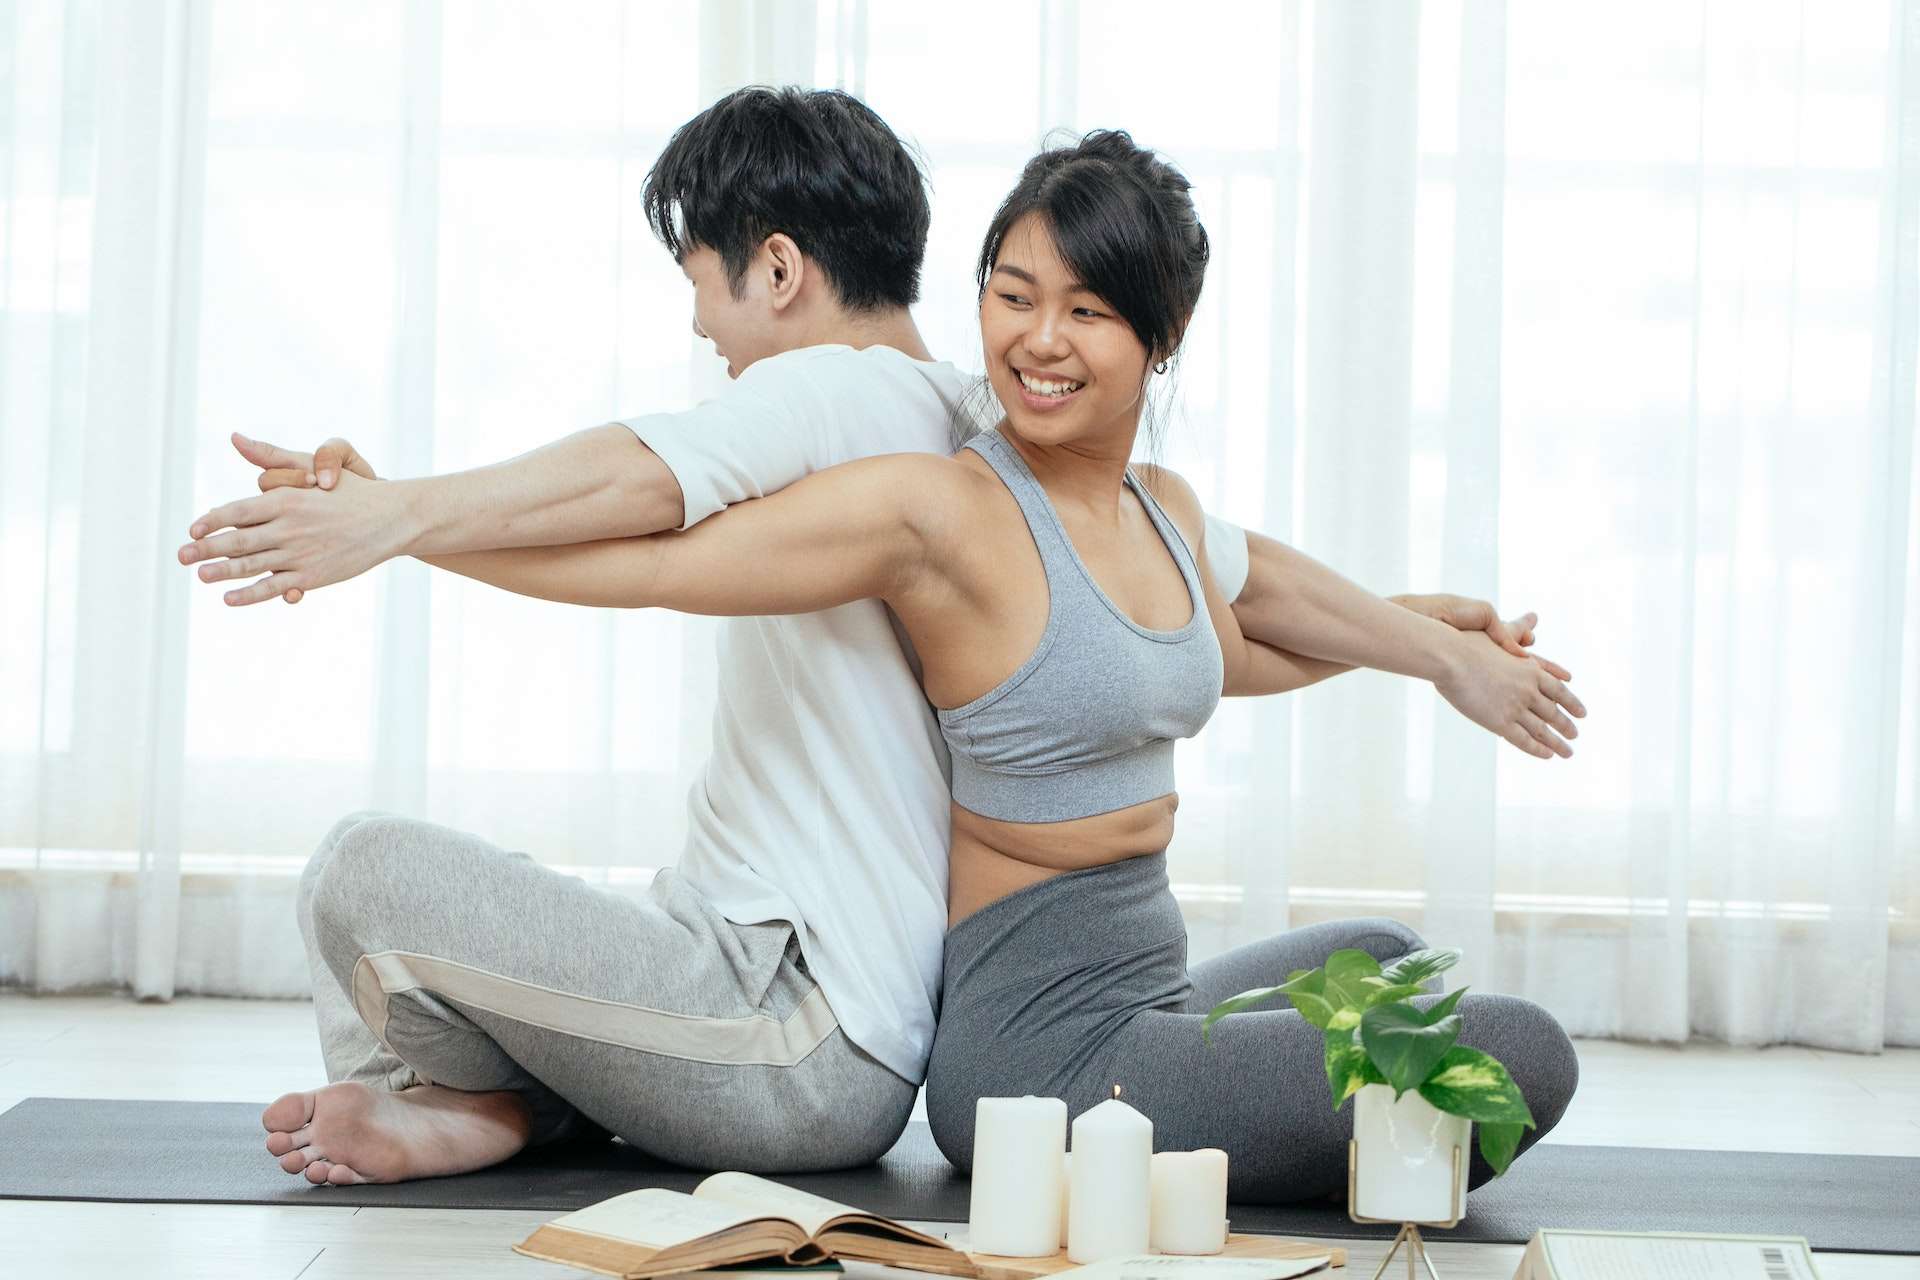 Happy man and woman doing partner eagle yoga pose